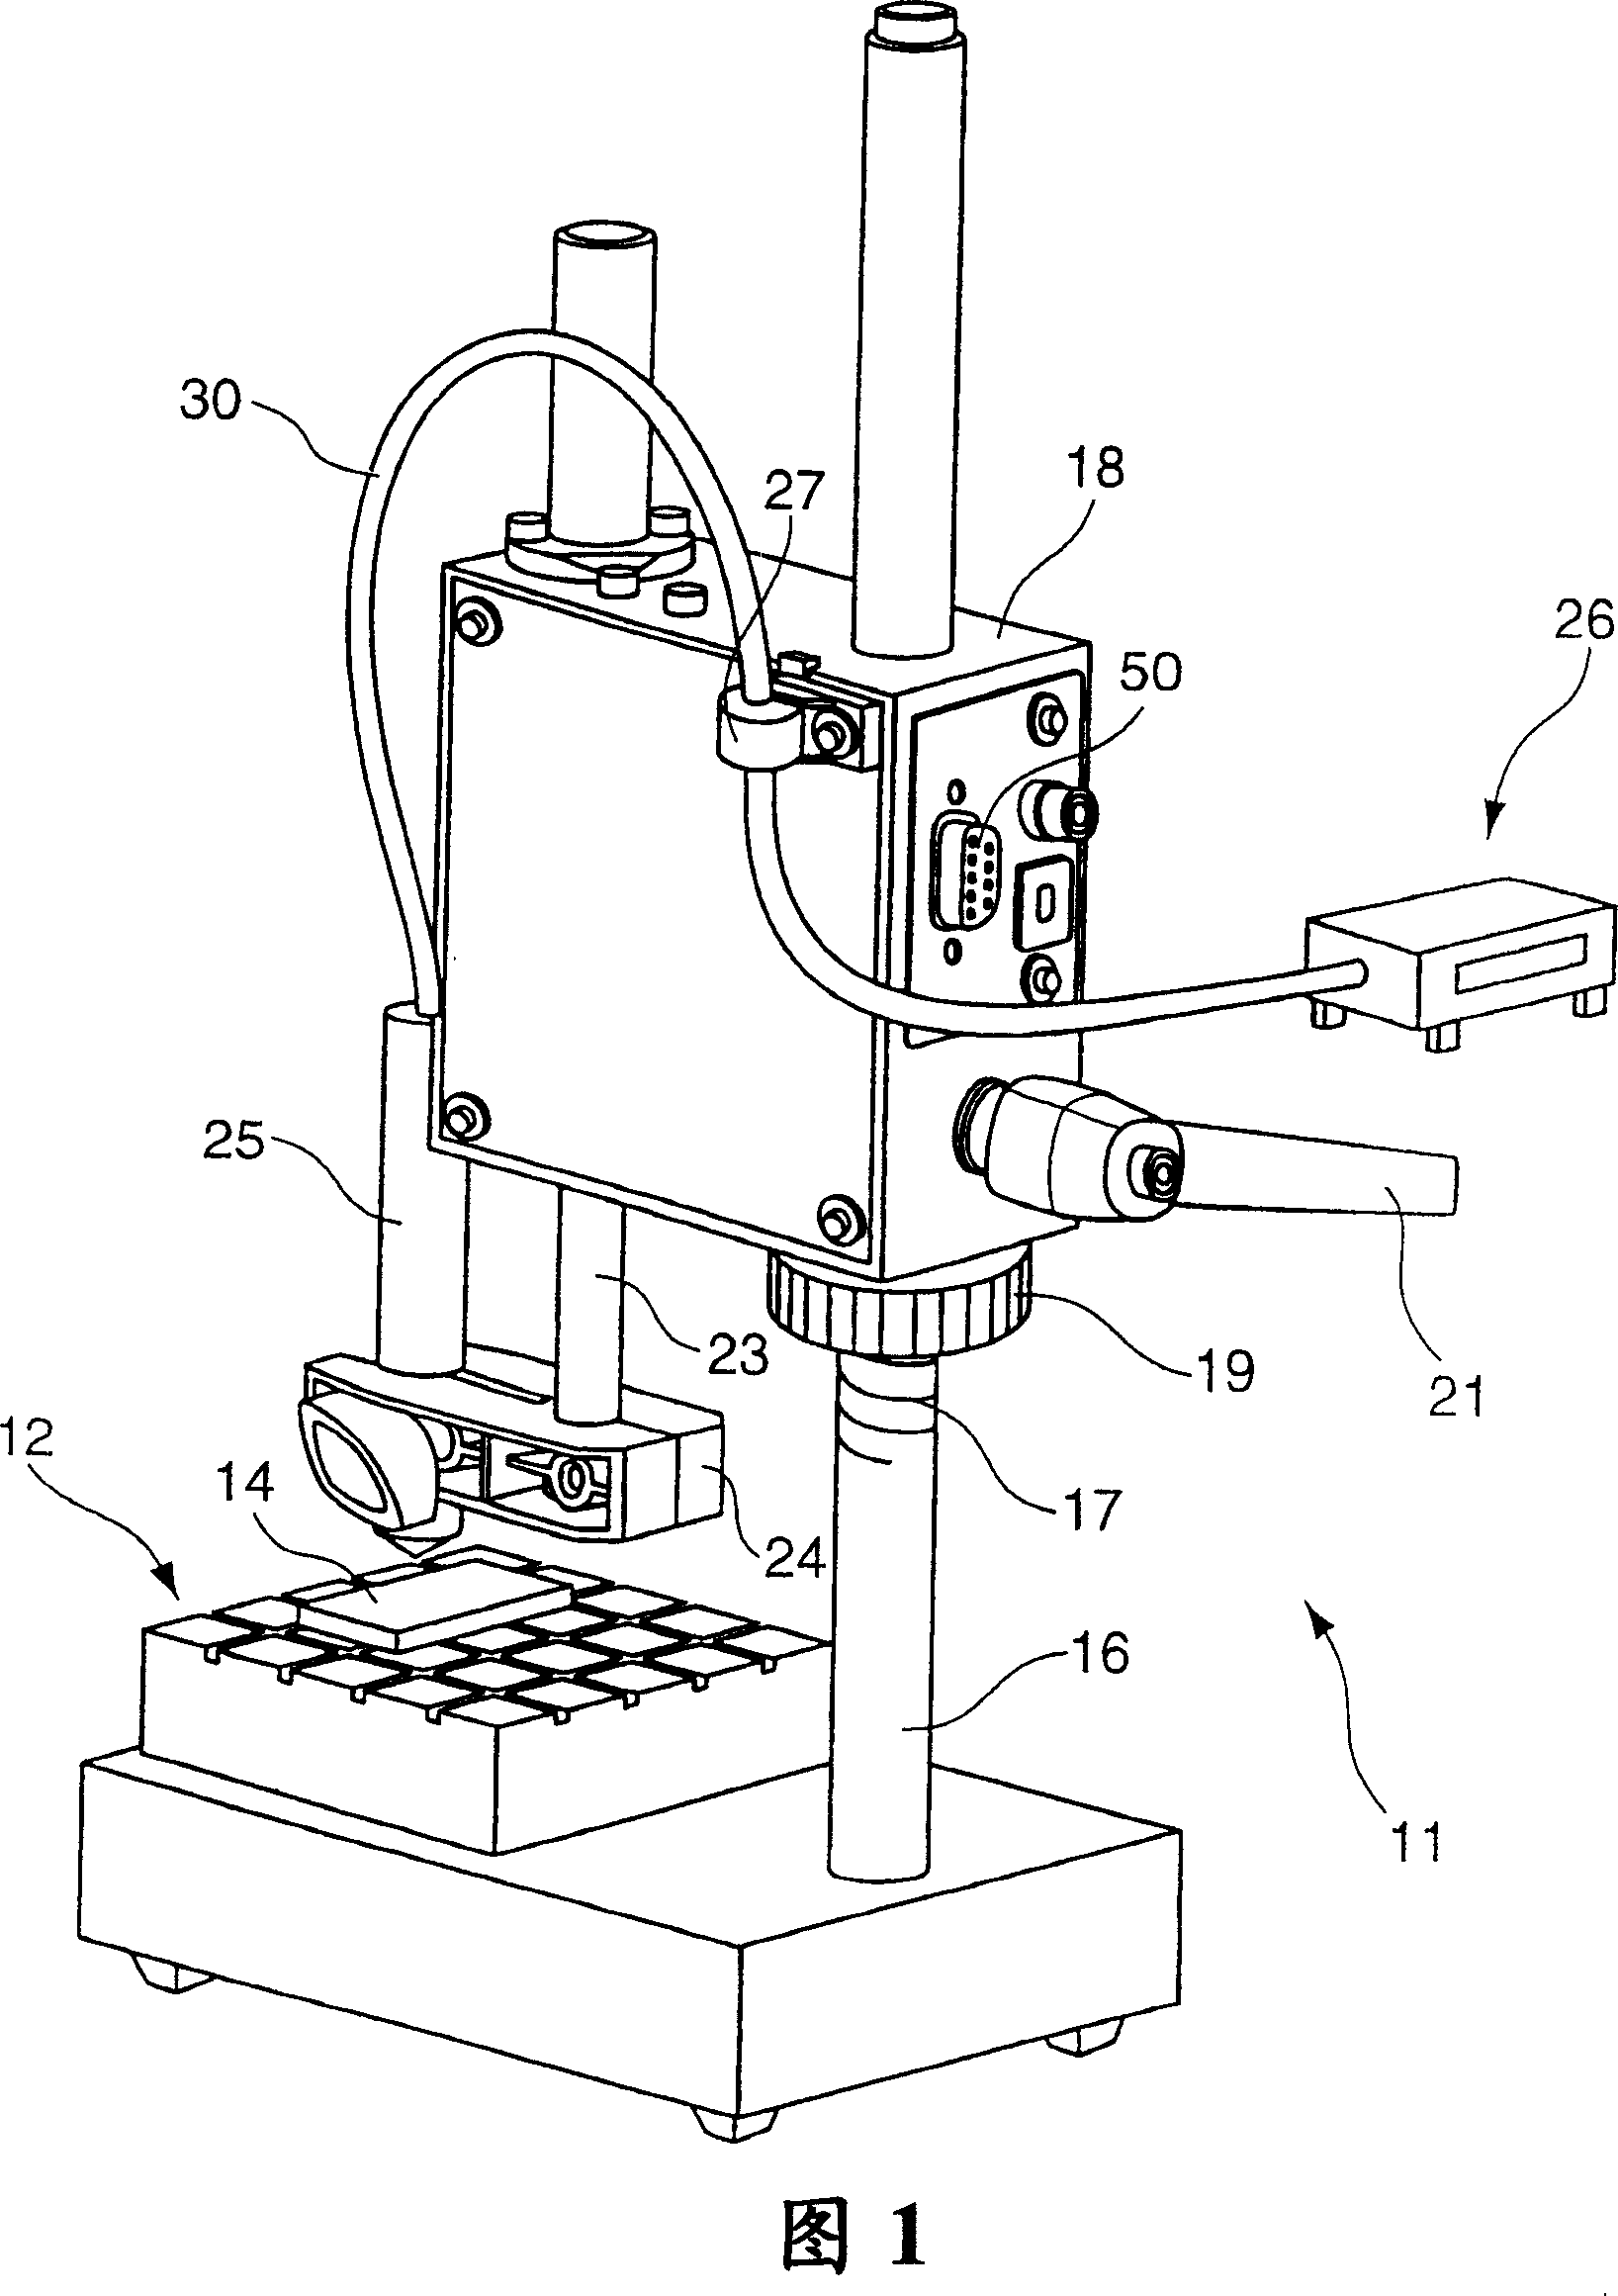 Measurement stand for holding a measuring instrument